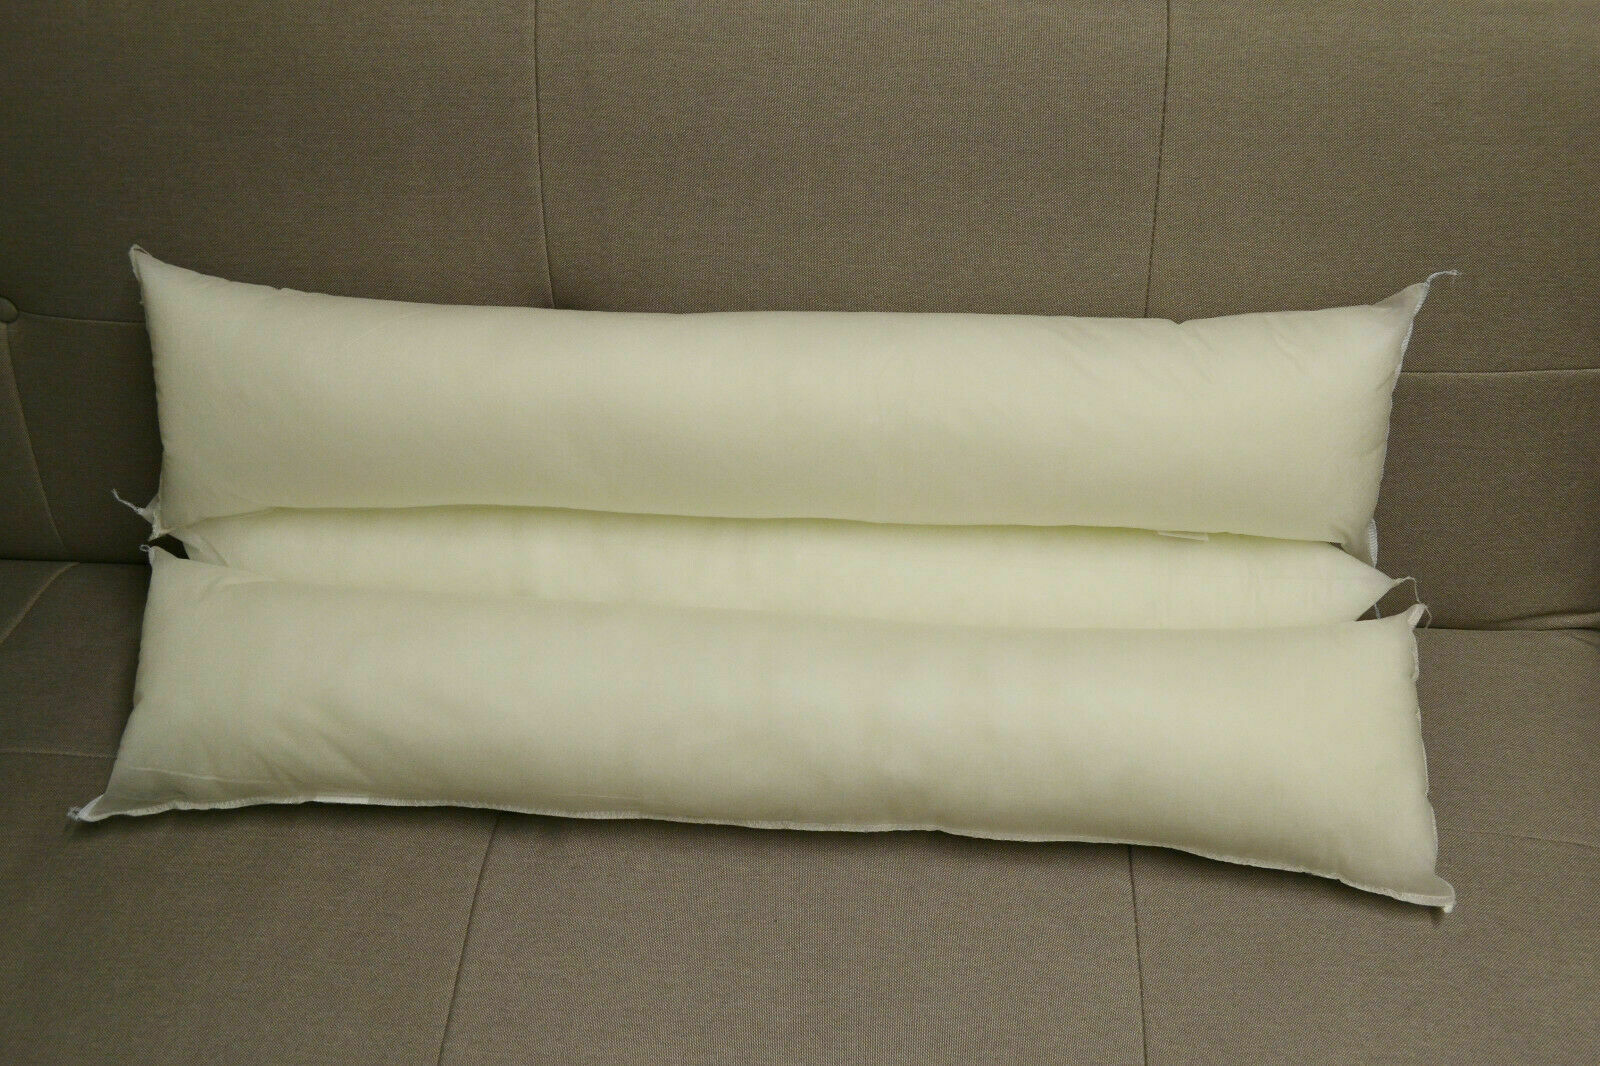 Round Shape White Bolster Pillow Cushion Long Body Support Orthopaedic Pregnancy 